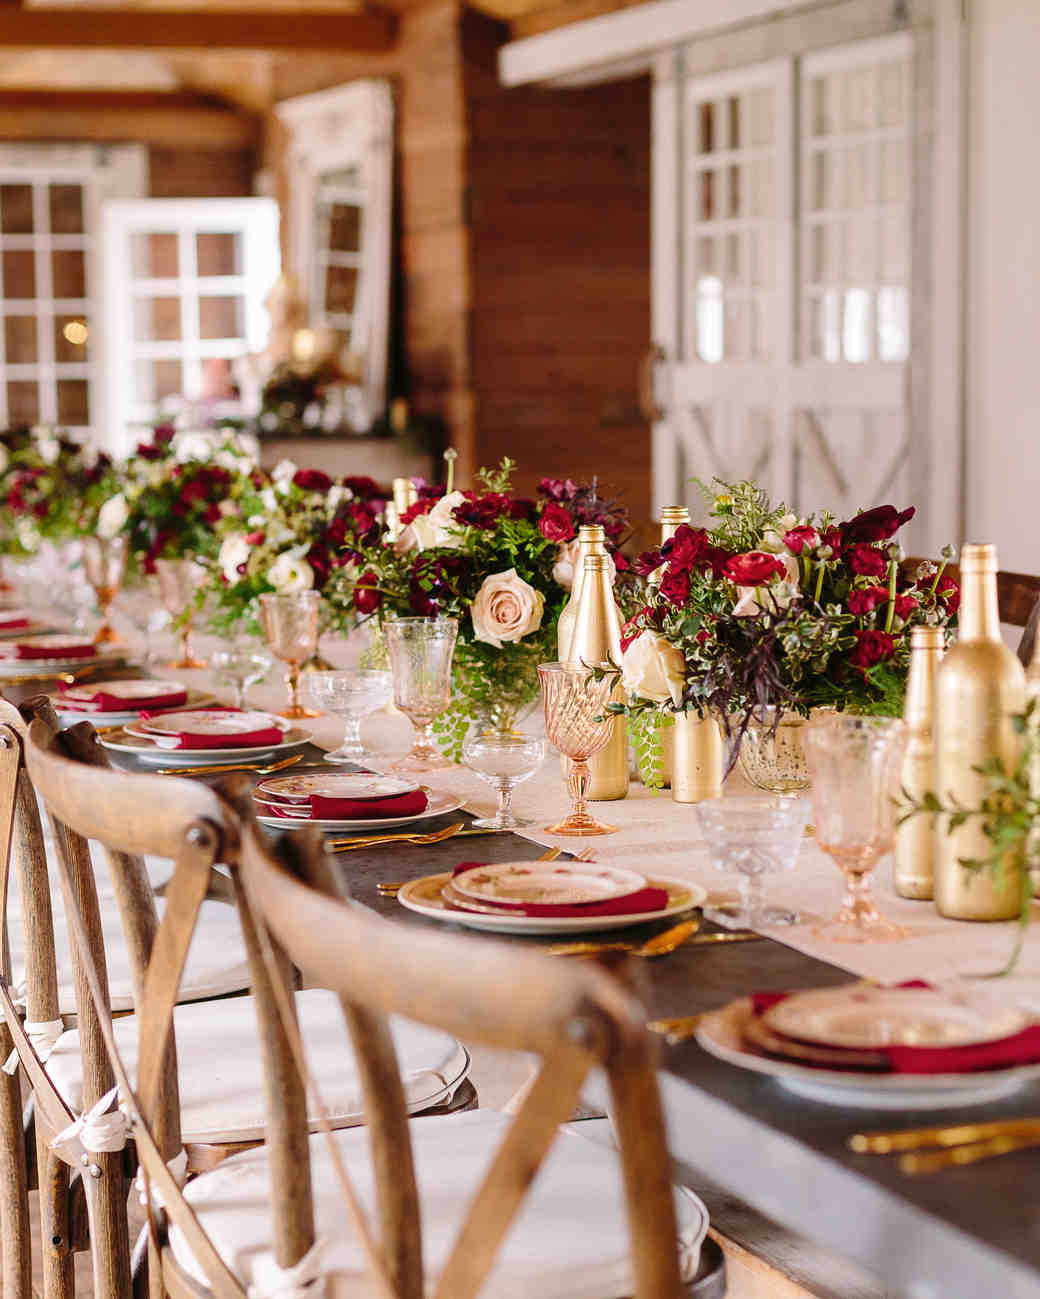 JewelToned Wedding Centerpieces That Will Dazzle Your